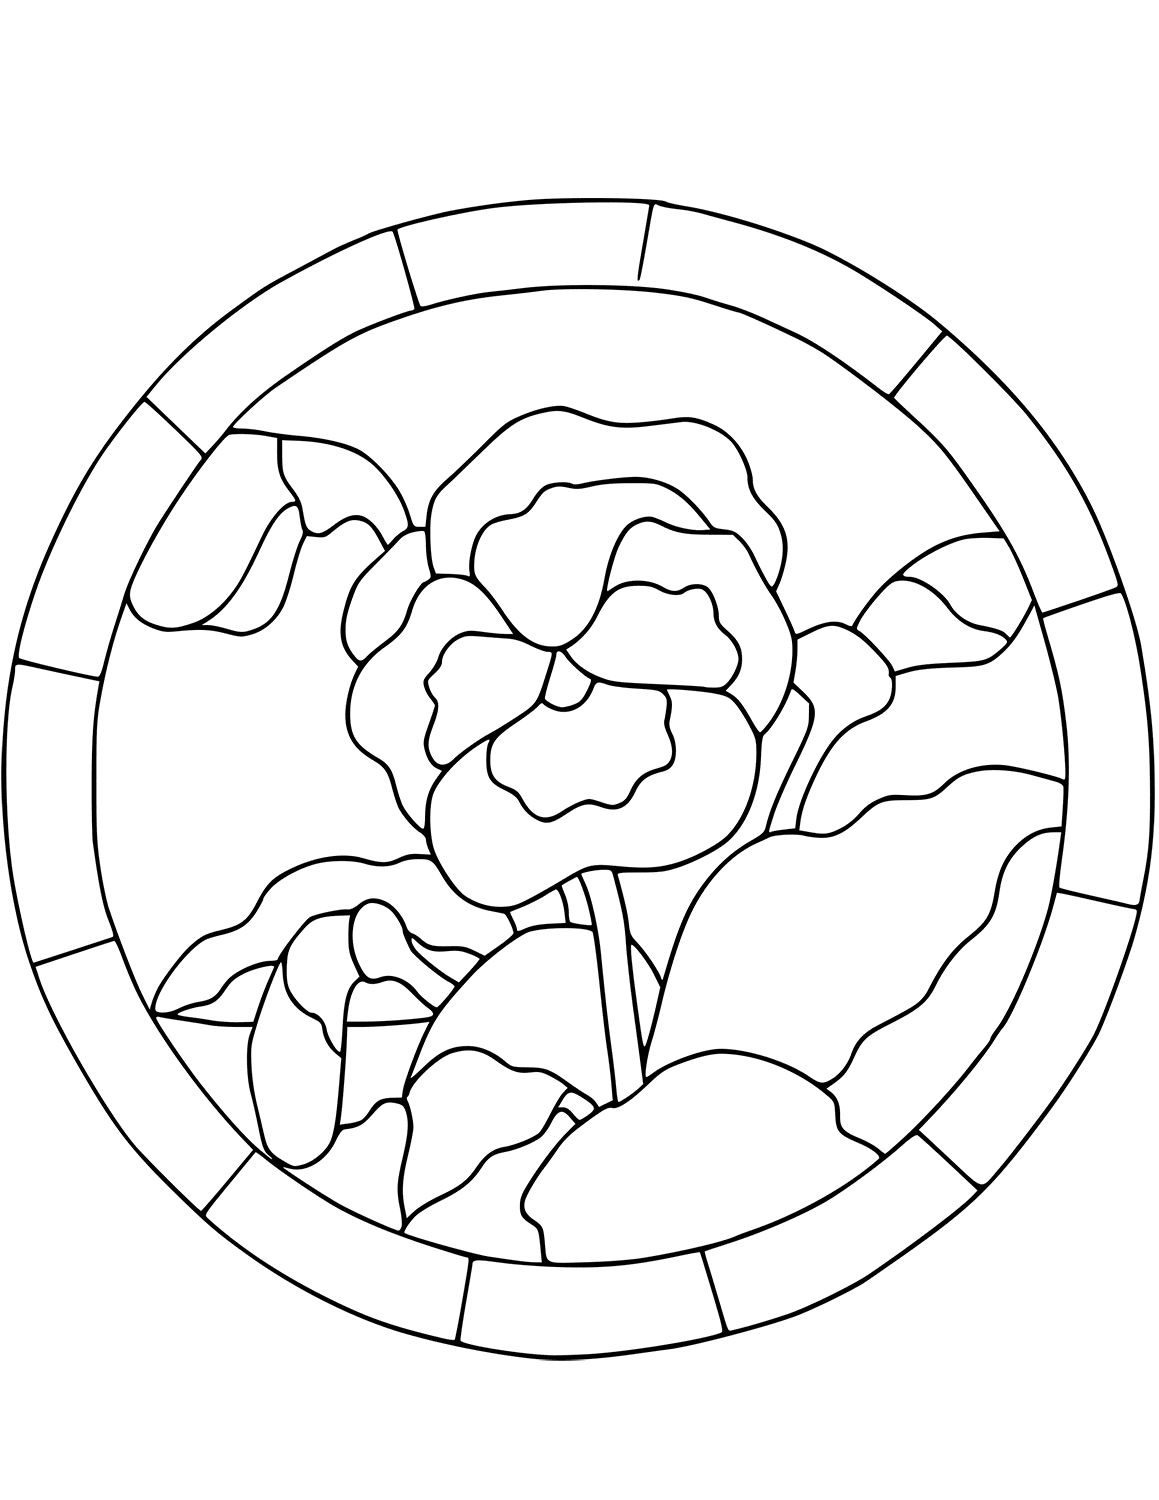 Pansy Mosiac Coloring Pages